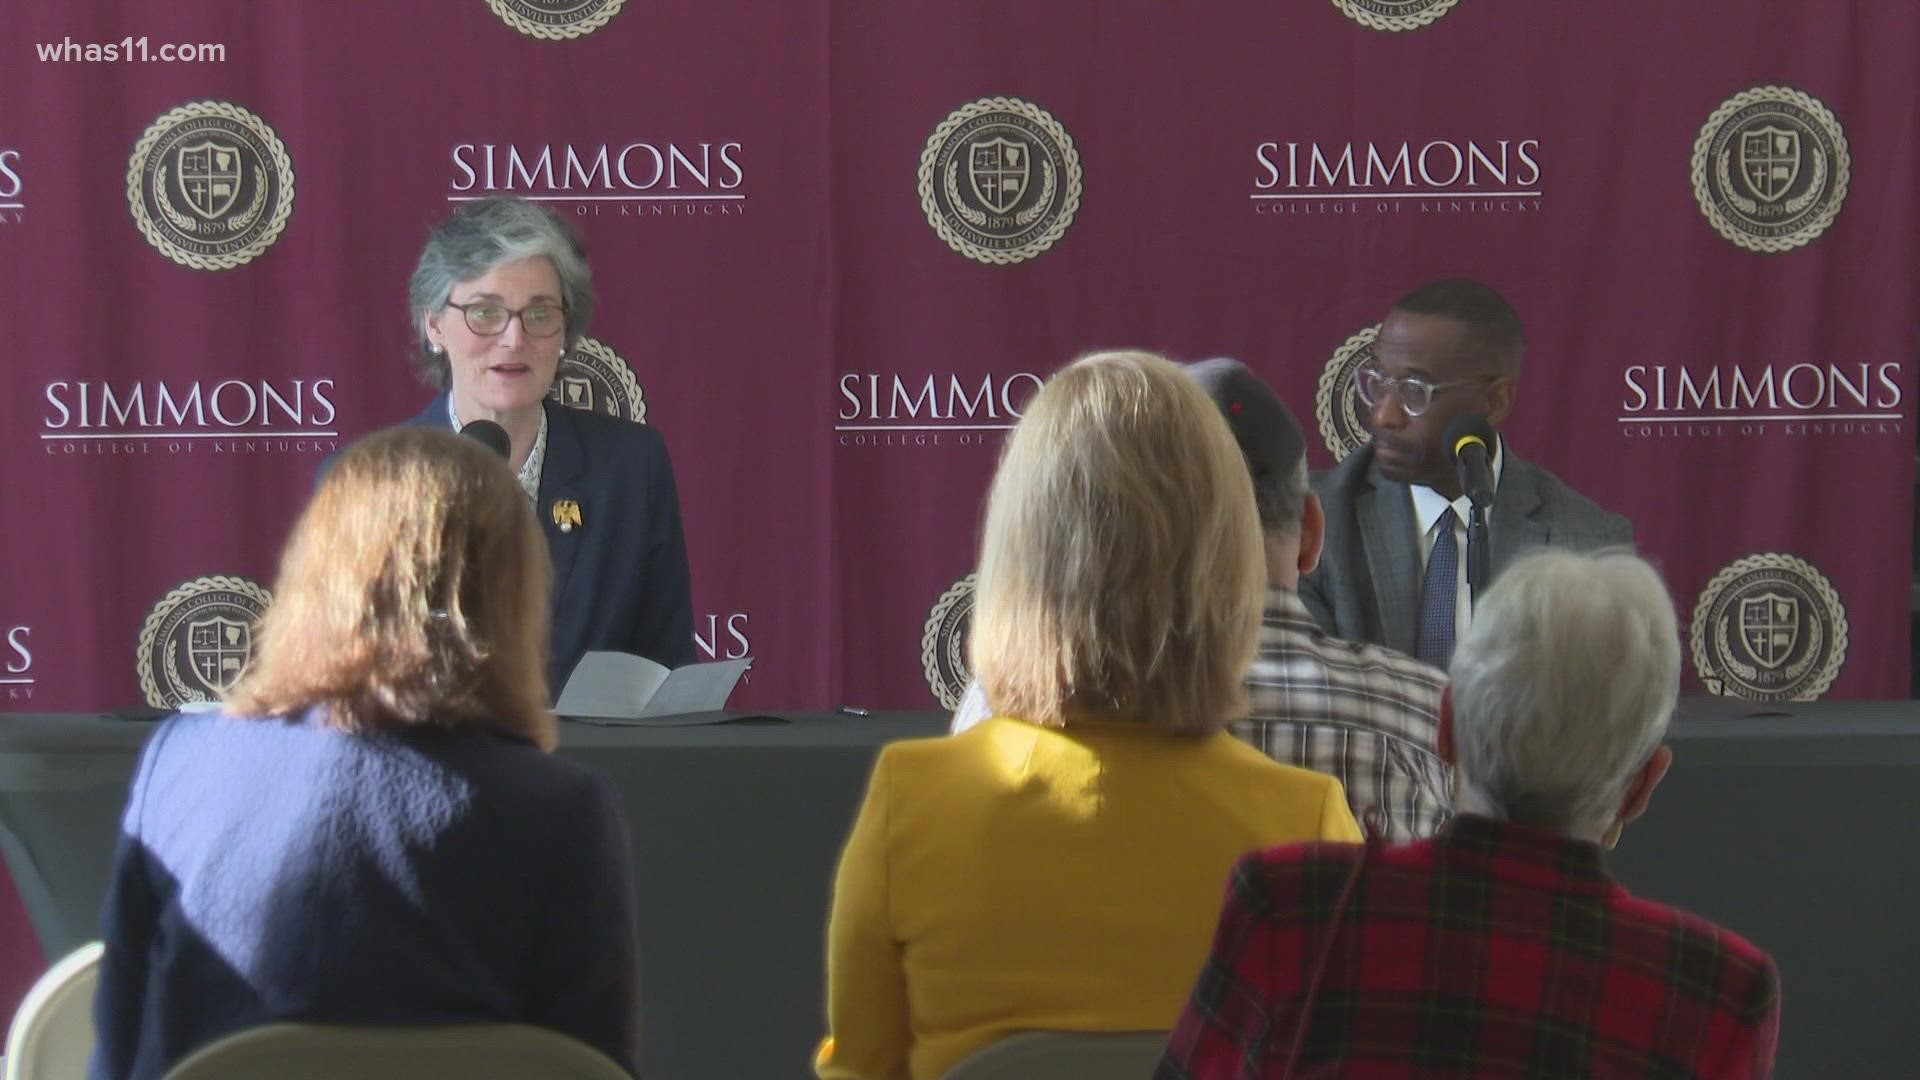 The agreement is focused on three areas: Student Life and Engagement, Academic Programs and Campus and Fiscal Affairs.